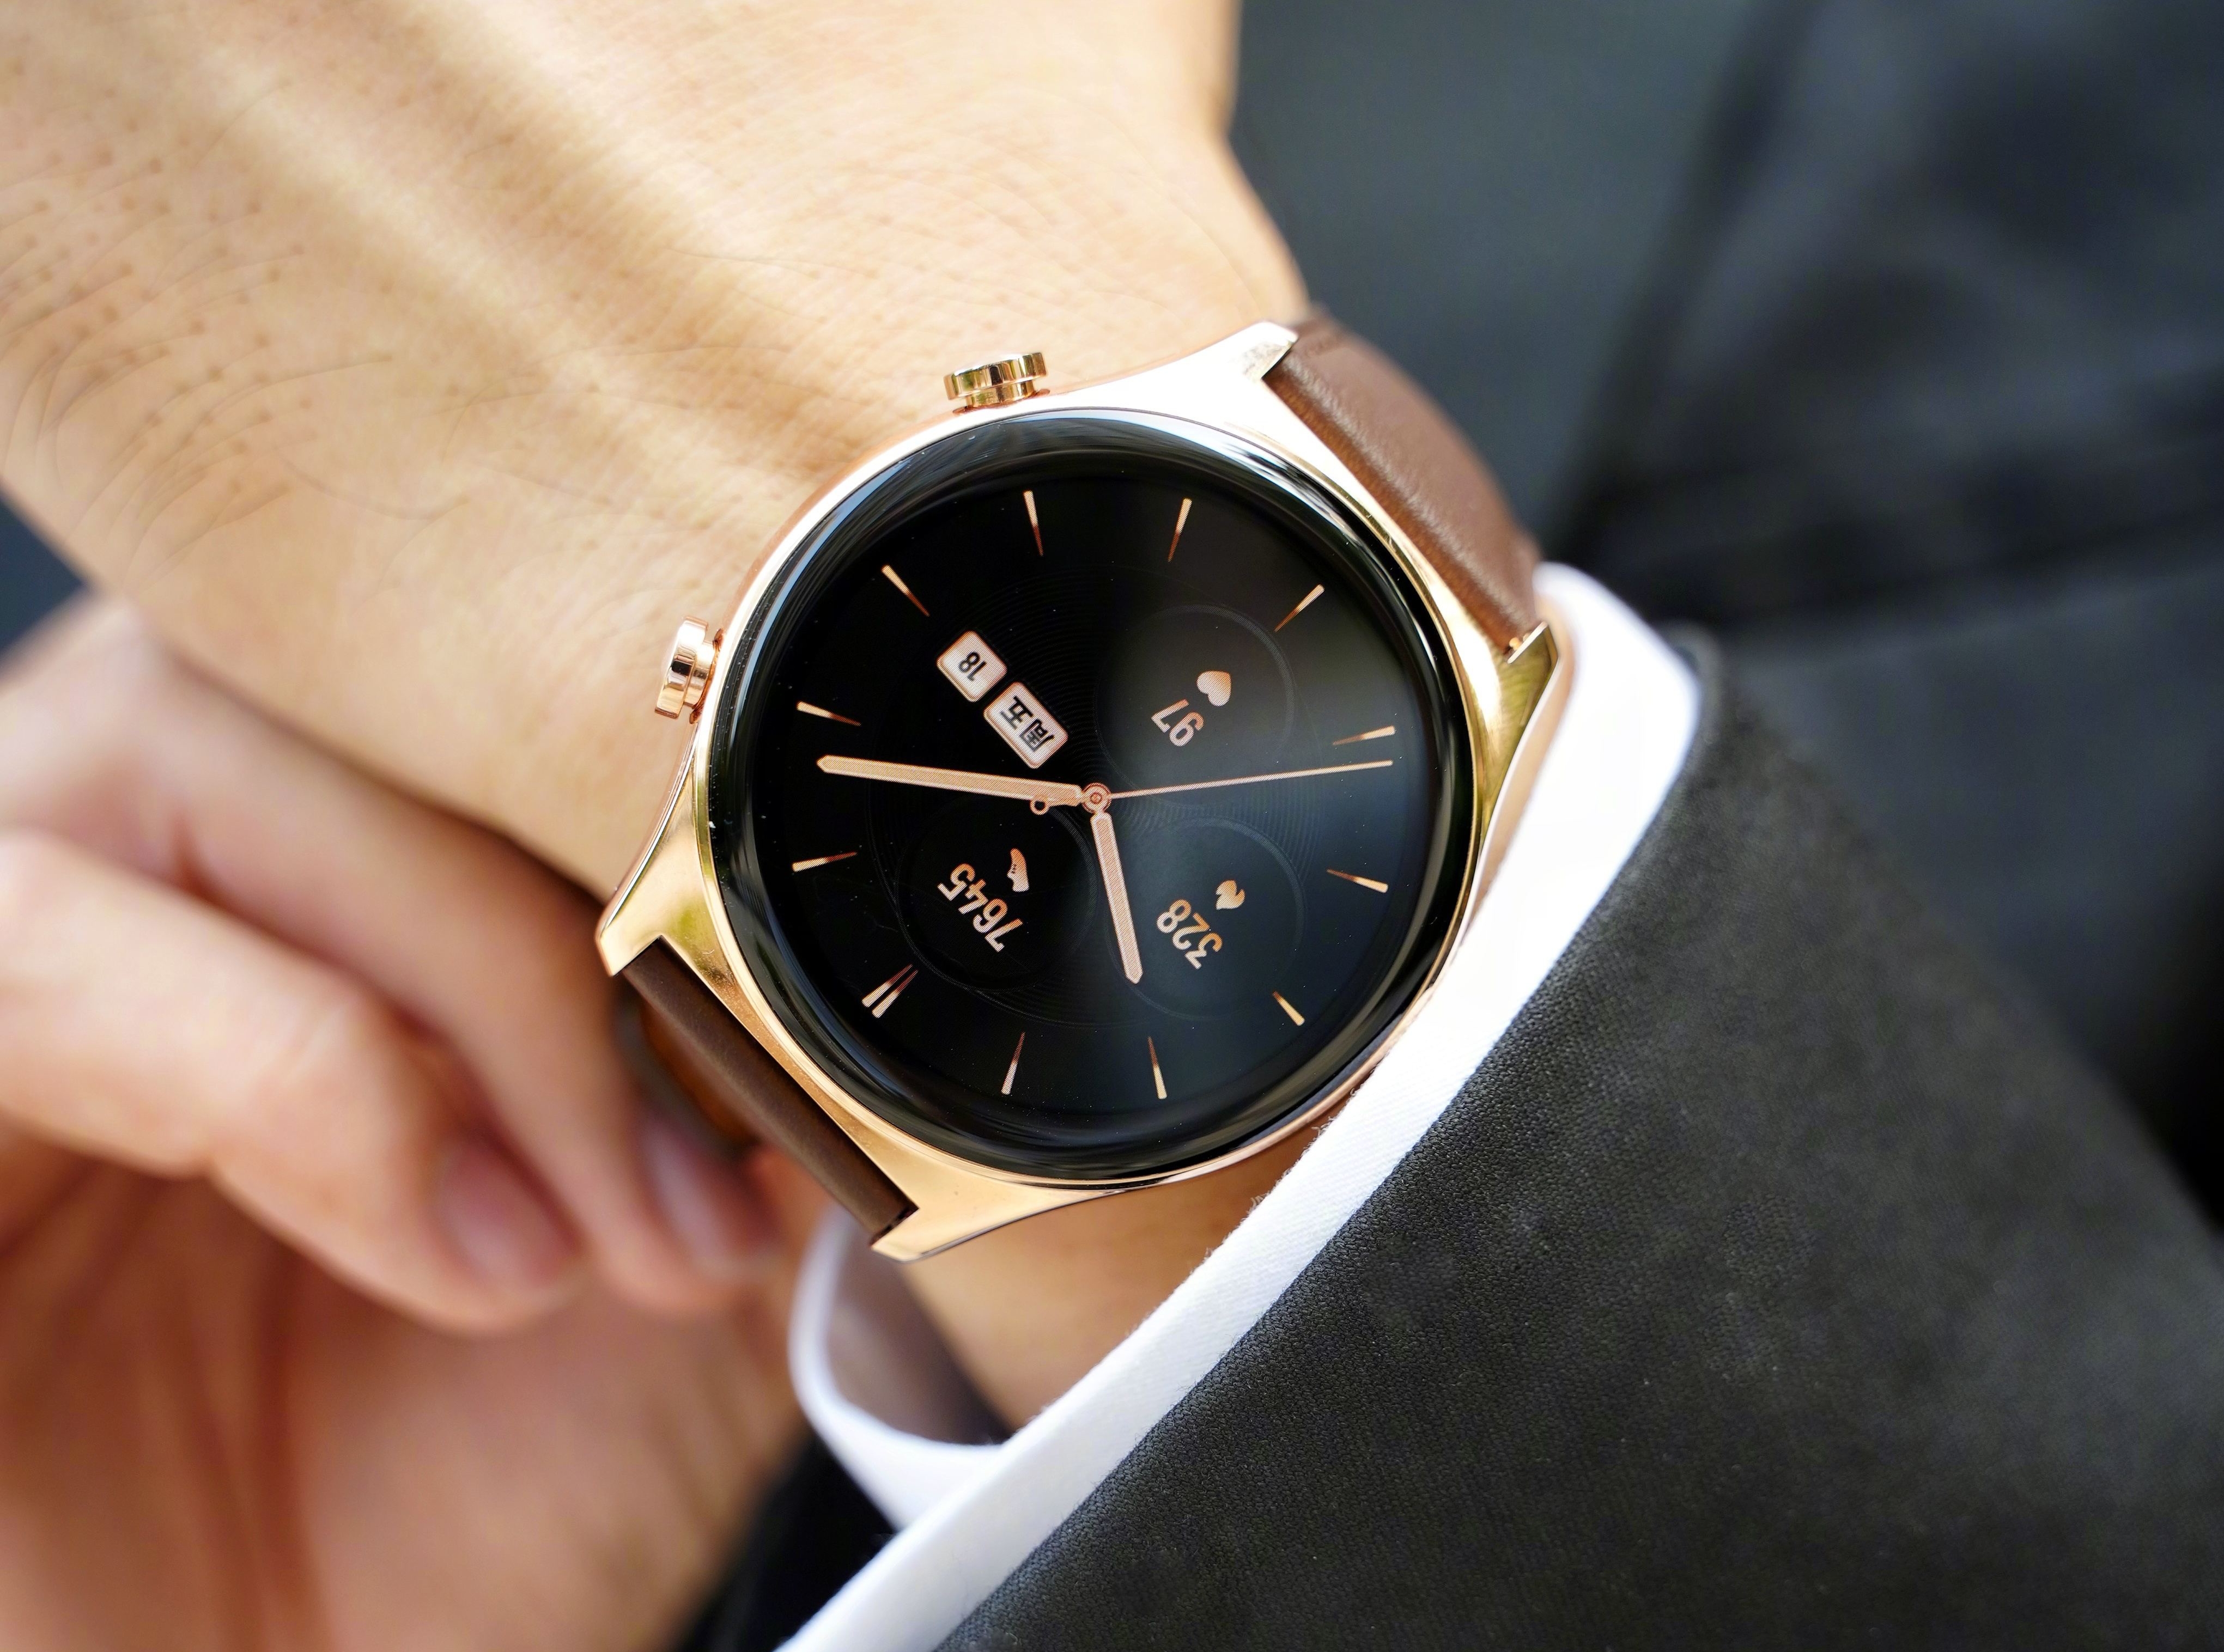 Honor showed "live" photos of the Watch GS3 smartwatch